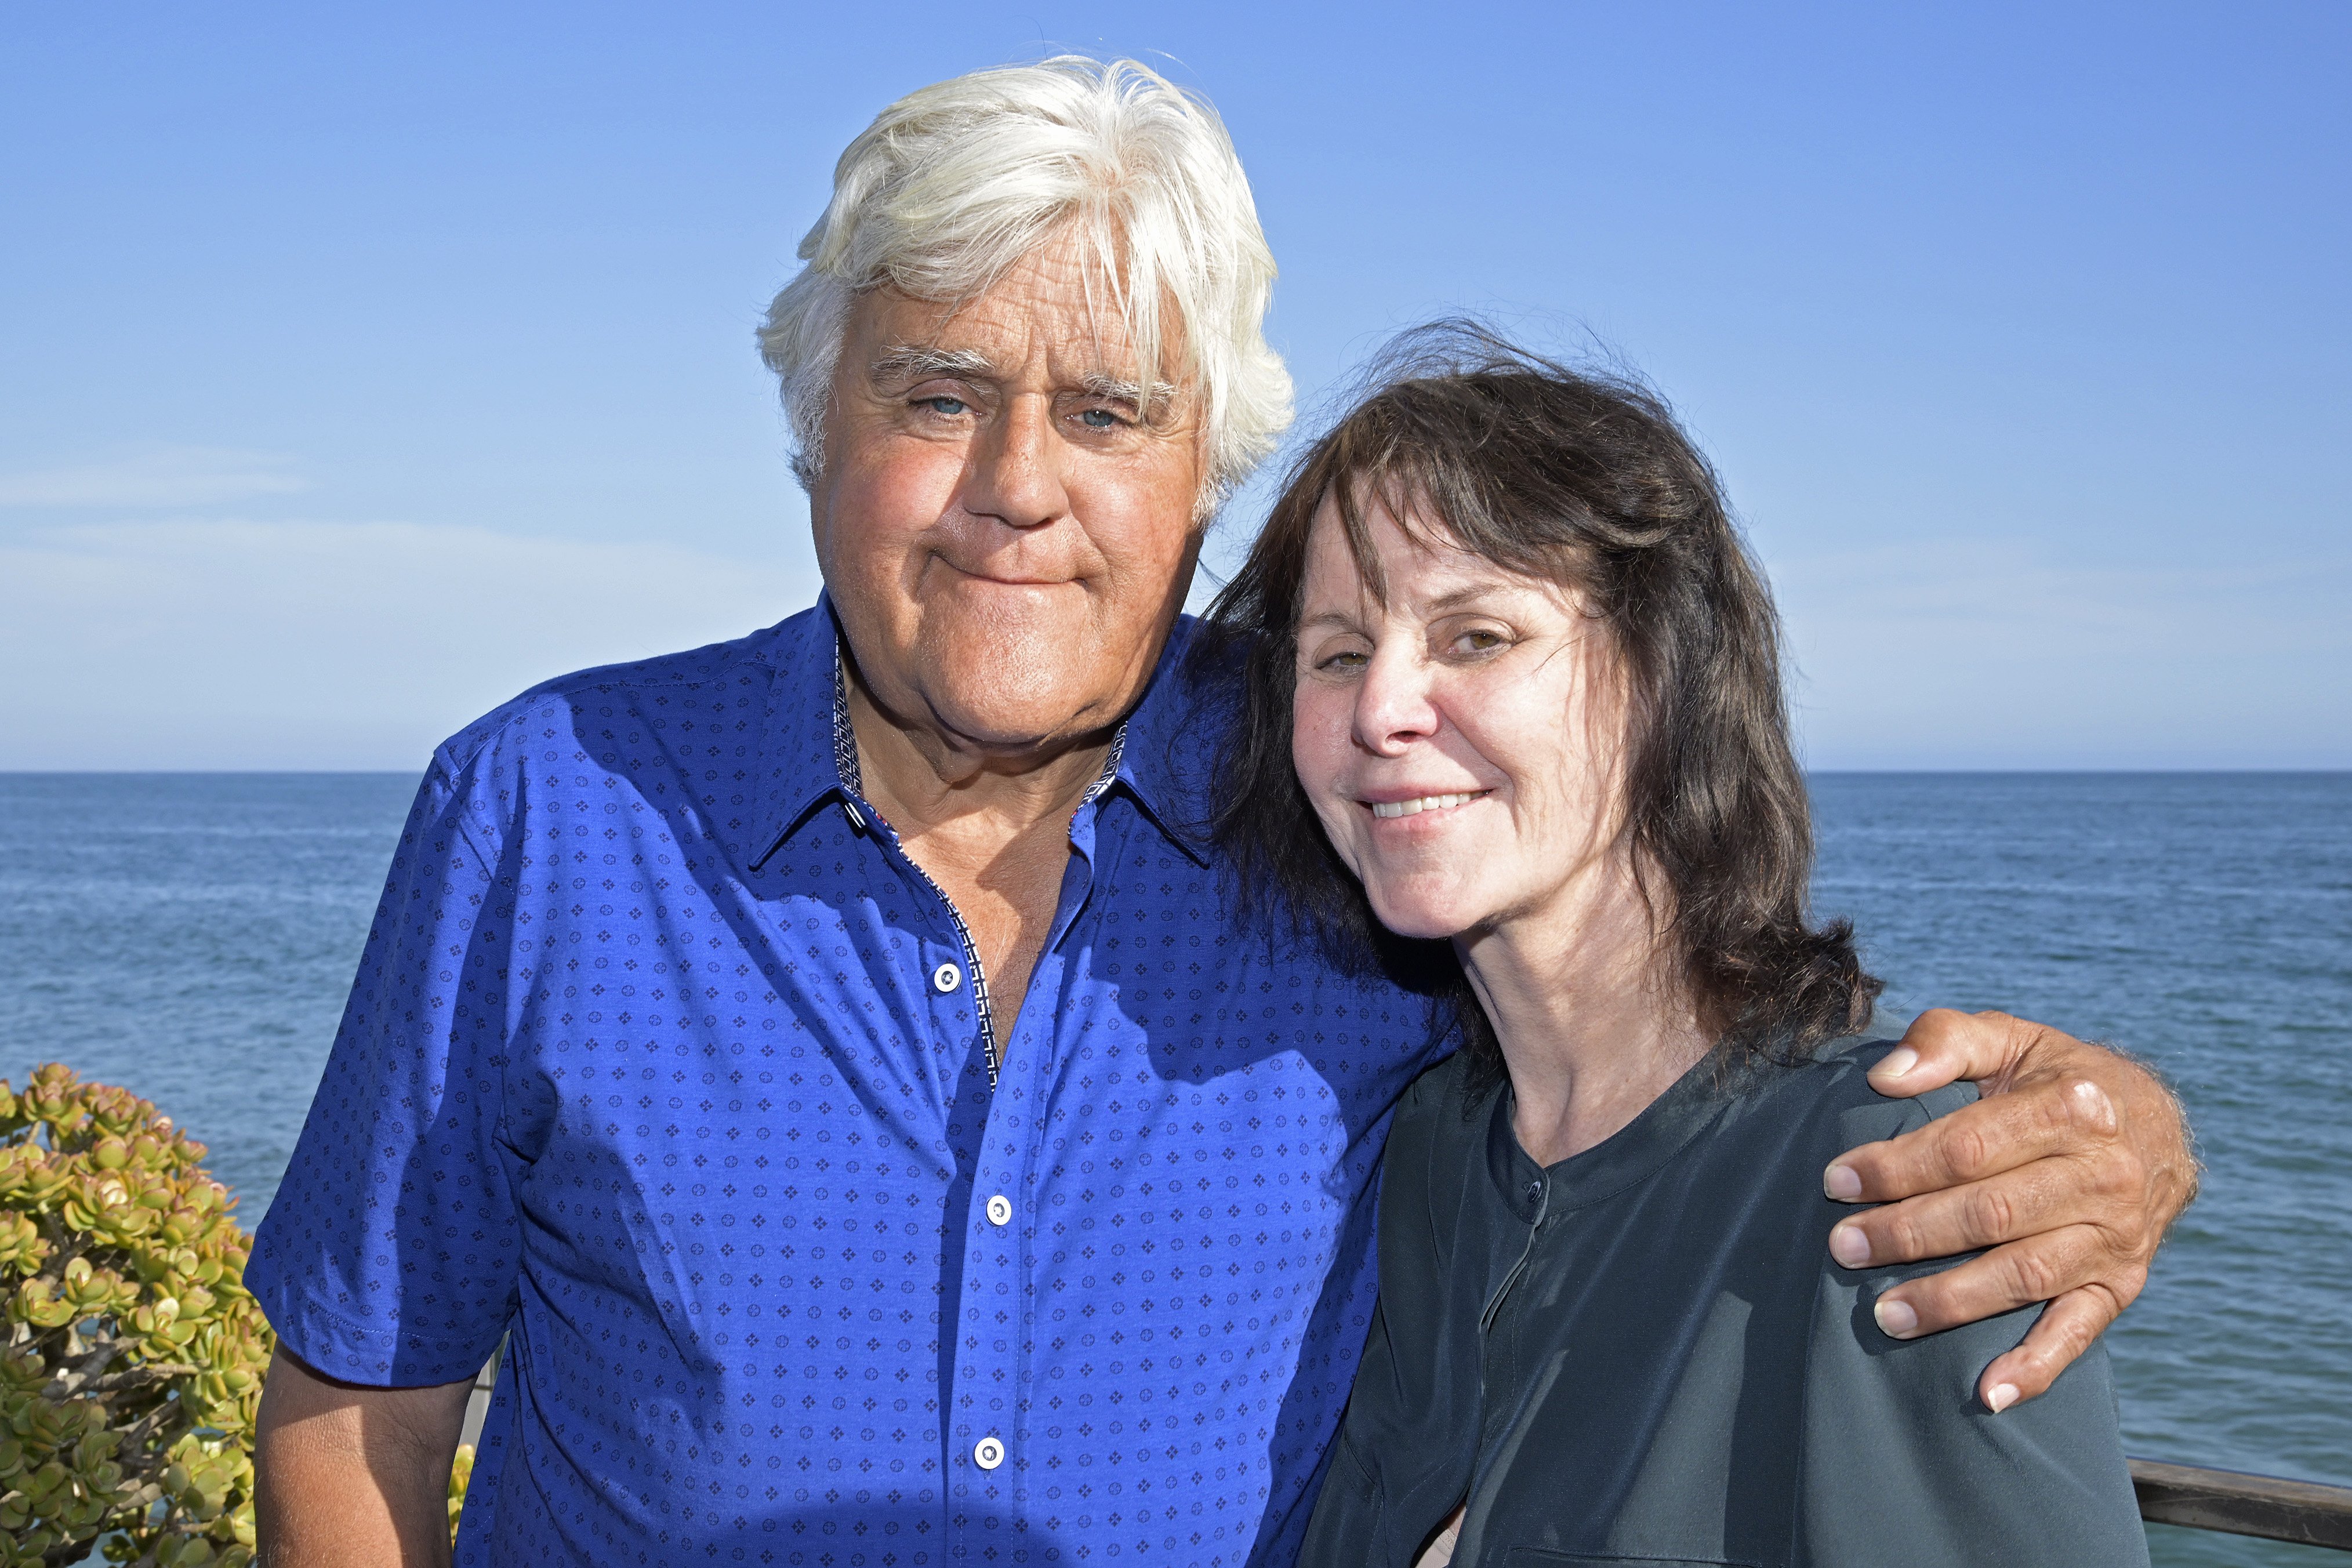 Jay Leno and his wife Mavis Leno attend the private unveiling of the Meyers Manx electric automobile at Little Beach House Malibu on August 8, 2022, in Malibu, California. | Source: Getty Images